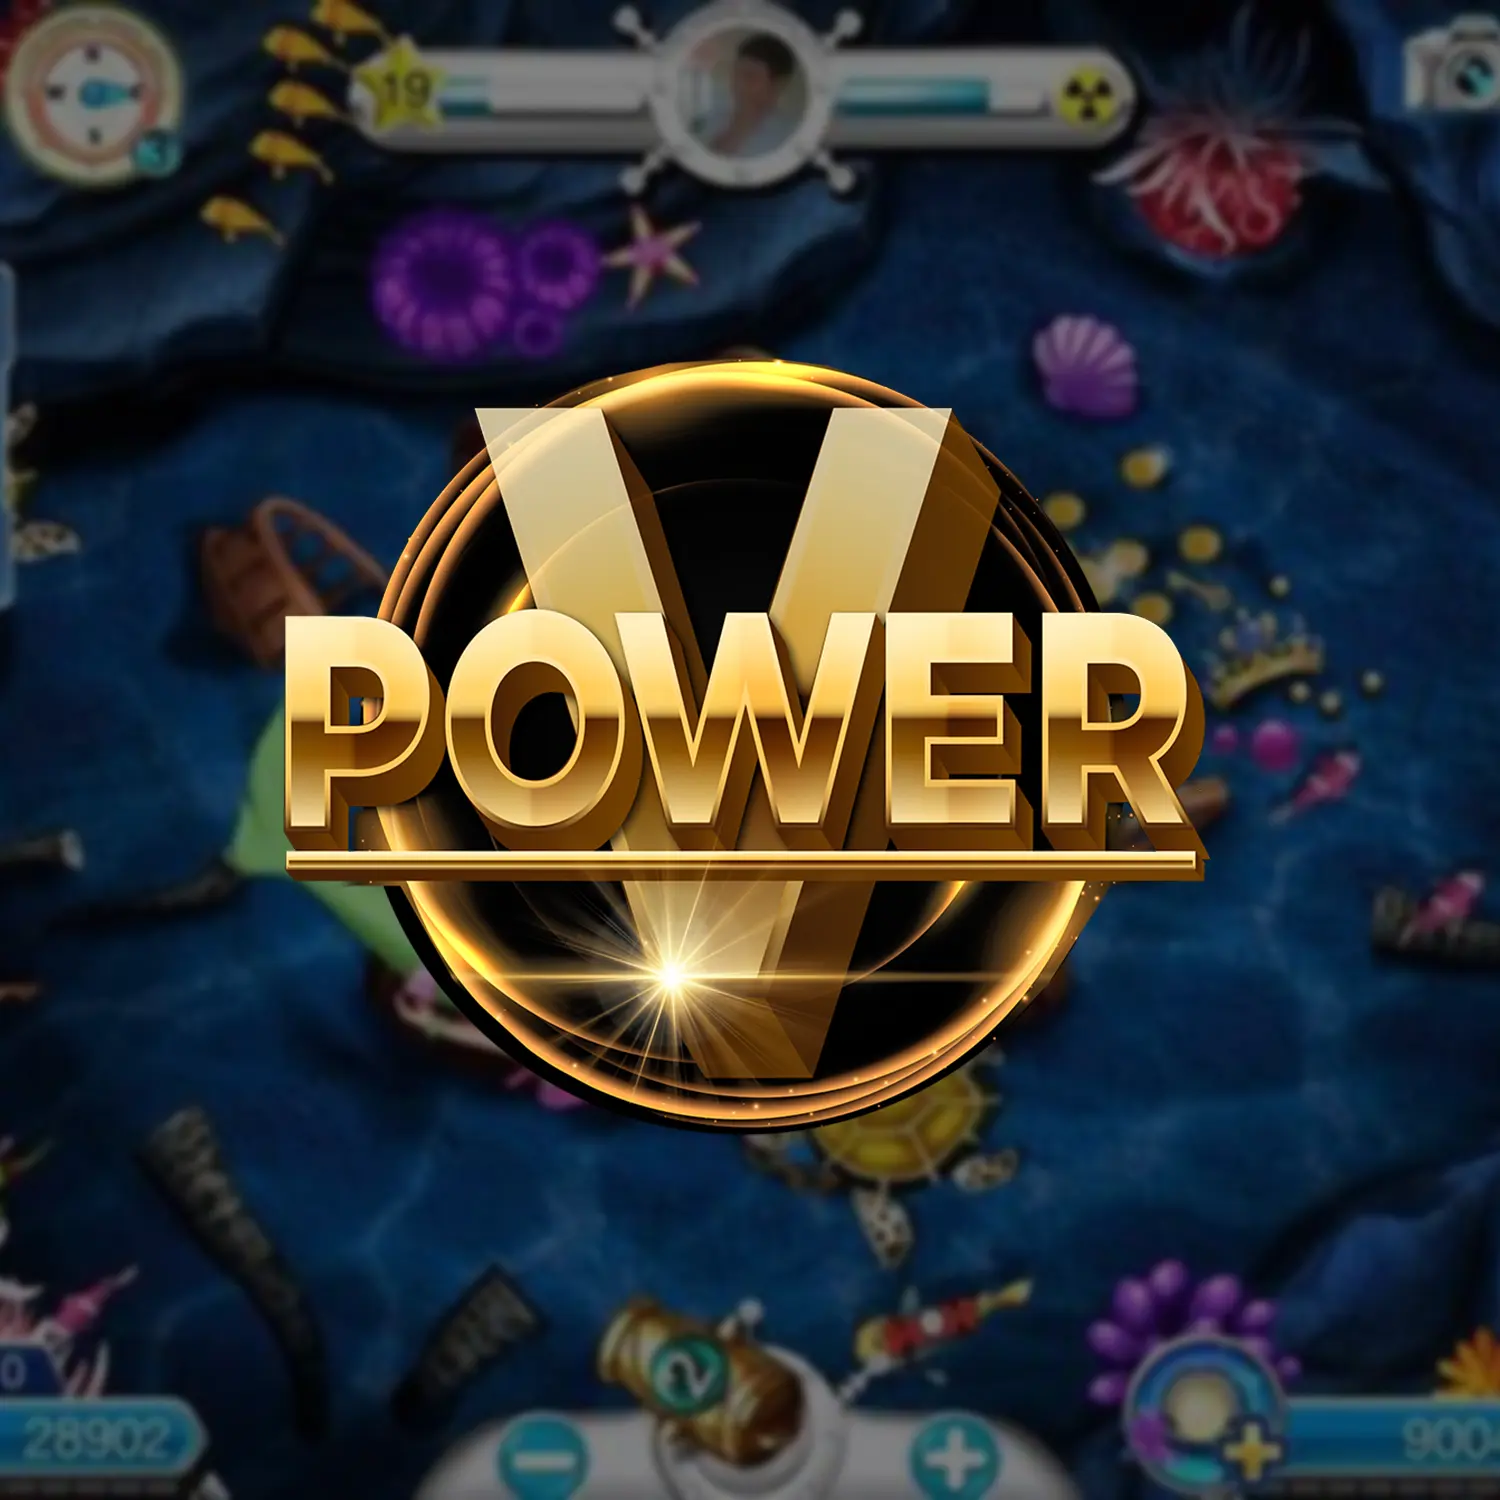 VPower New High Definition Online Fish Game App Profit Create A Game Online Arcade Shooting Game